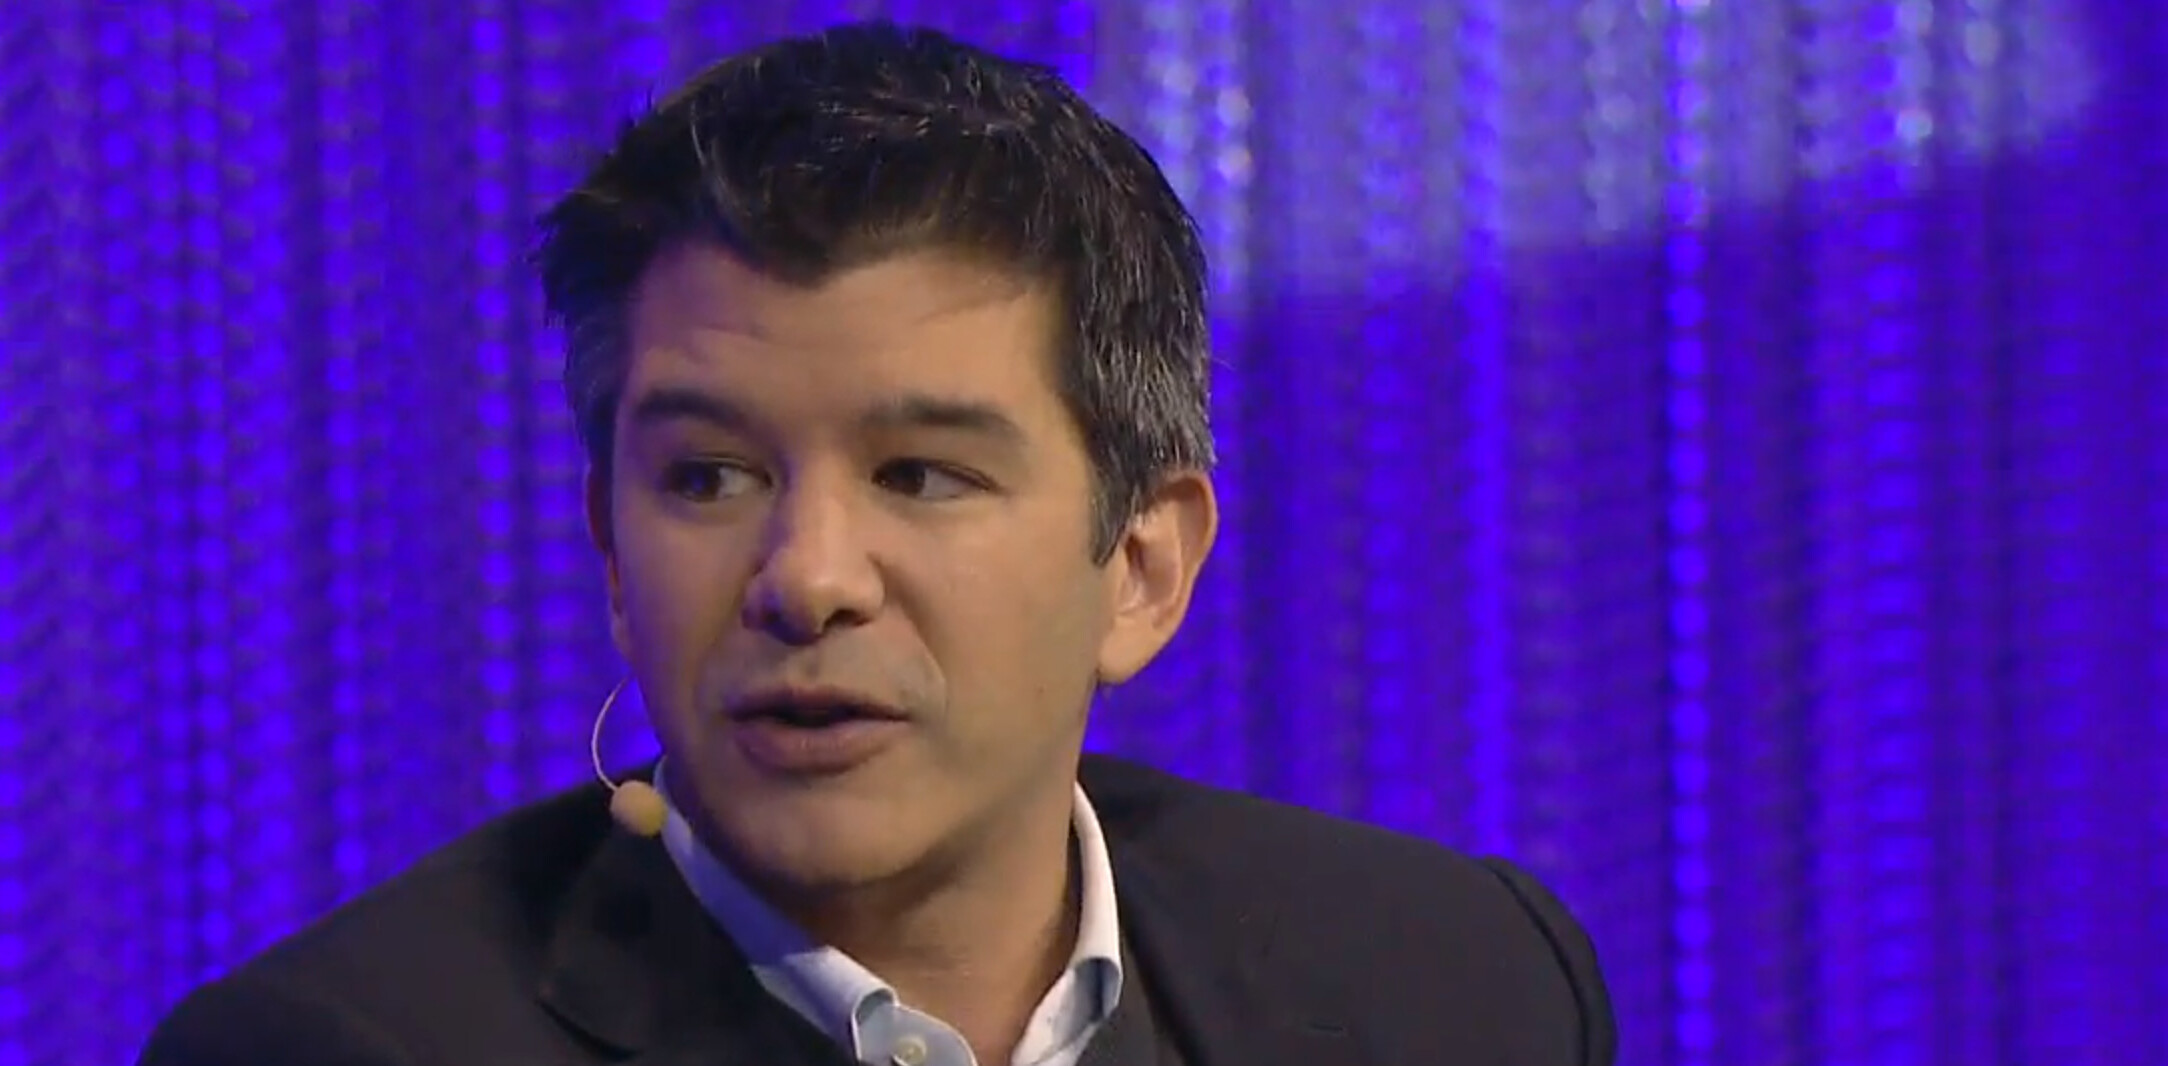 Uber’s CEO hints that it could branch out into other on-demand transport and delivery services